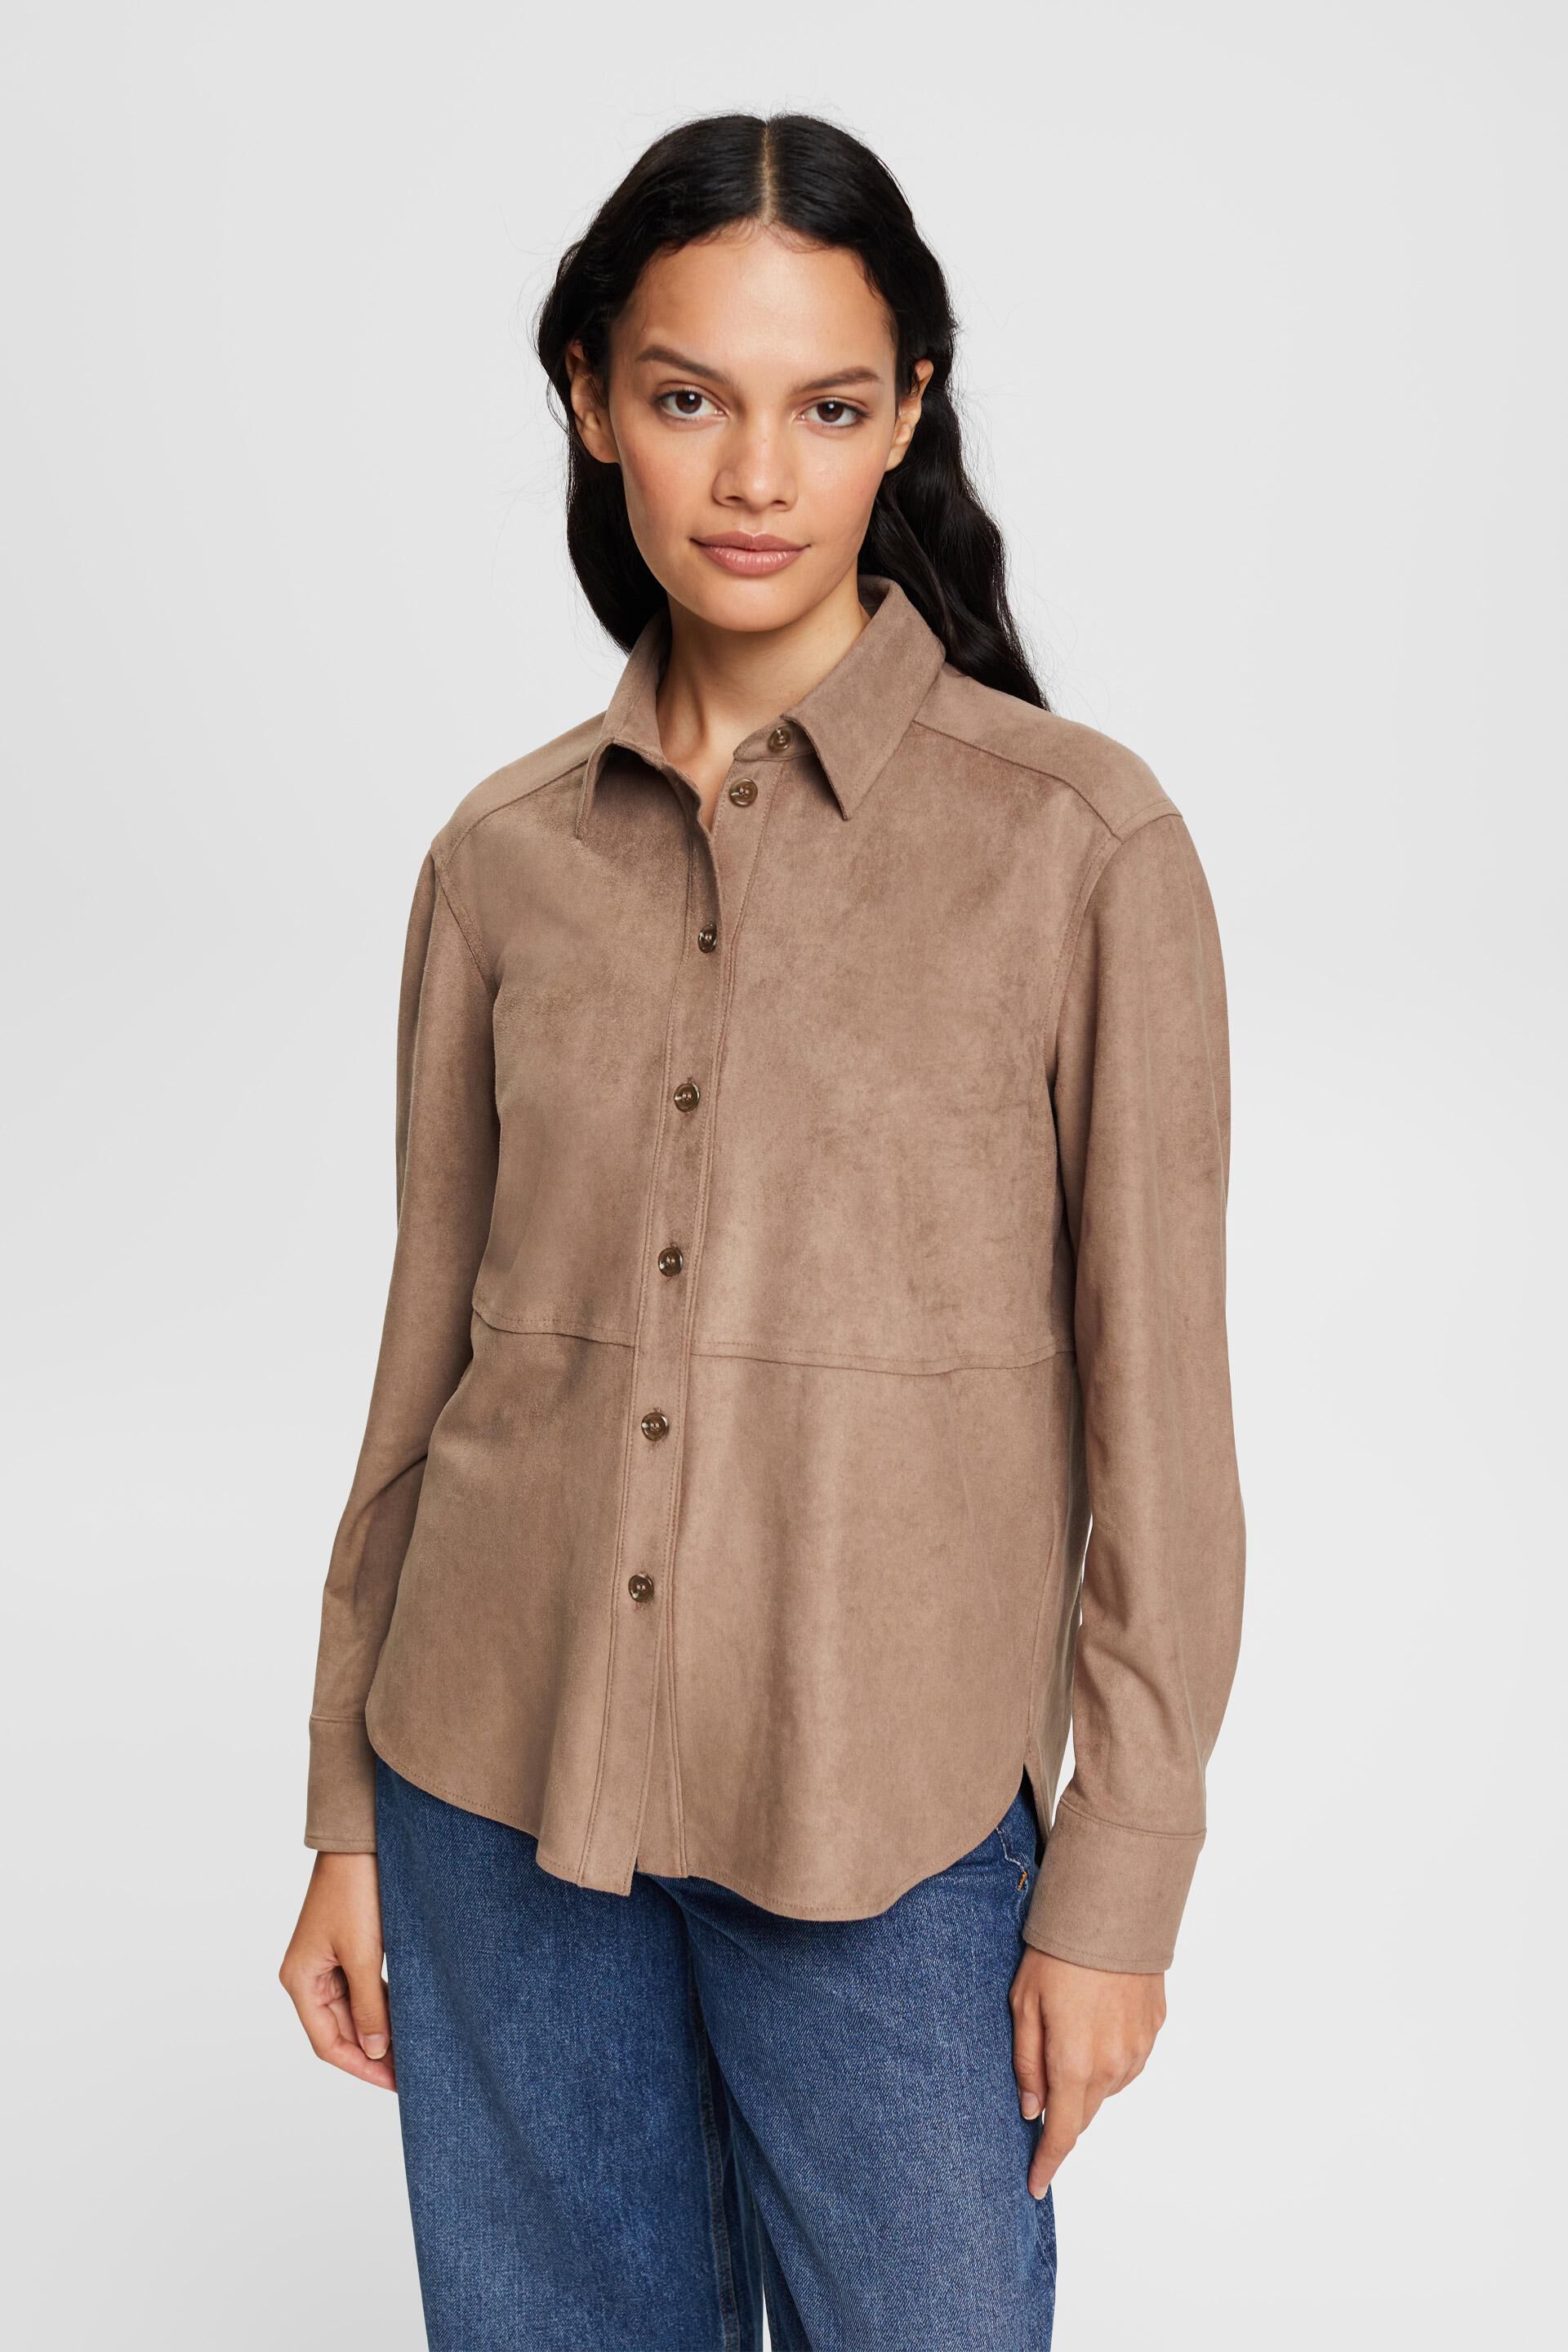 Mode Blouses Oversized blouses Asos Oversized blouse wit-bruin gestreept patroon casual uitstraling 